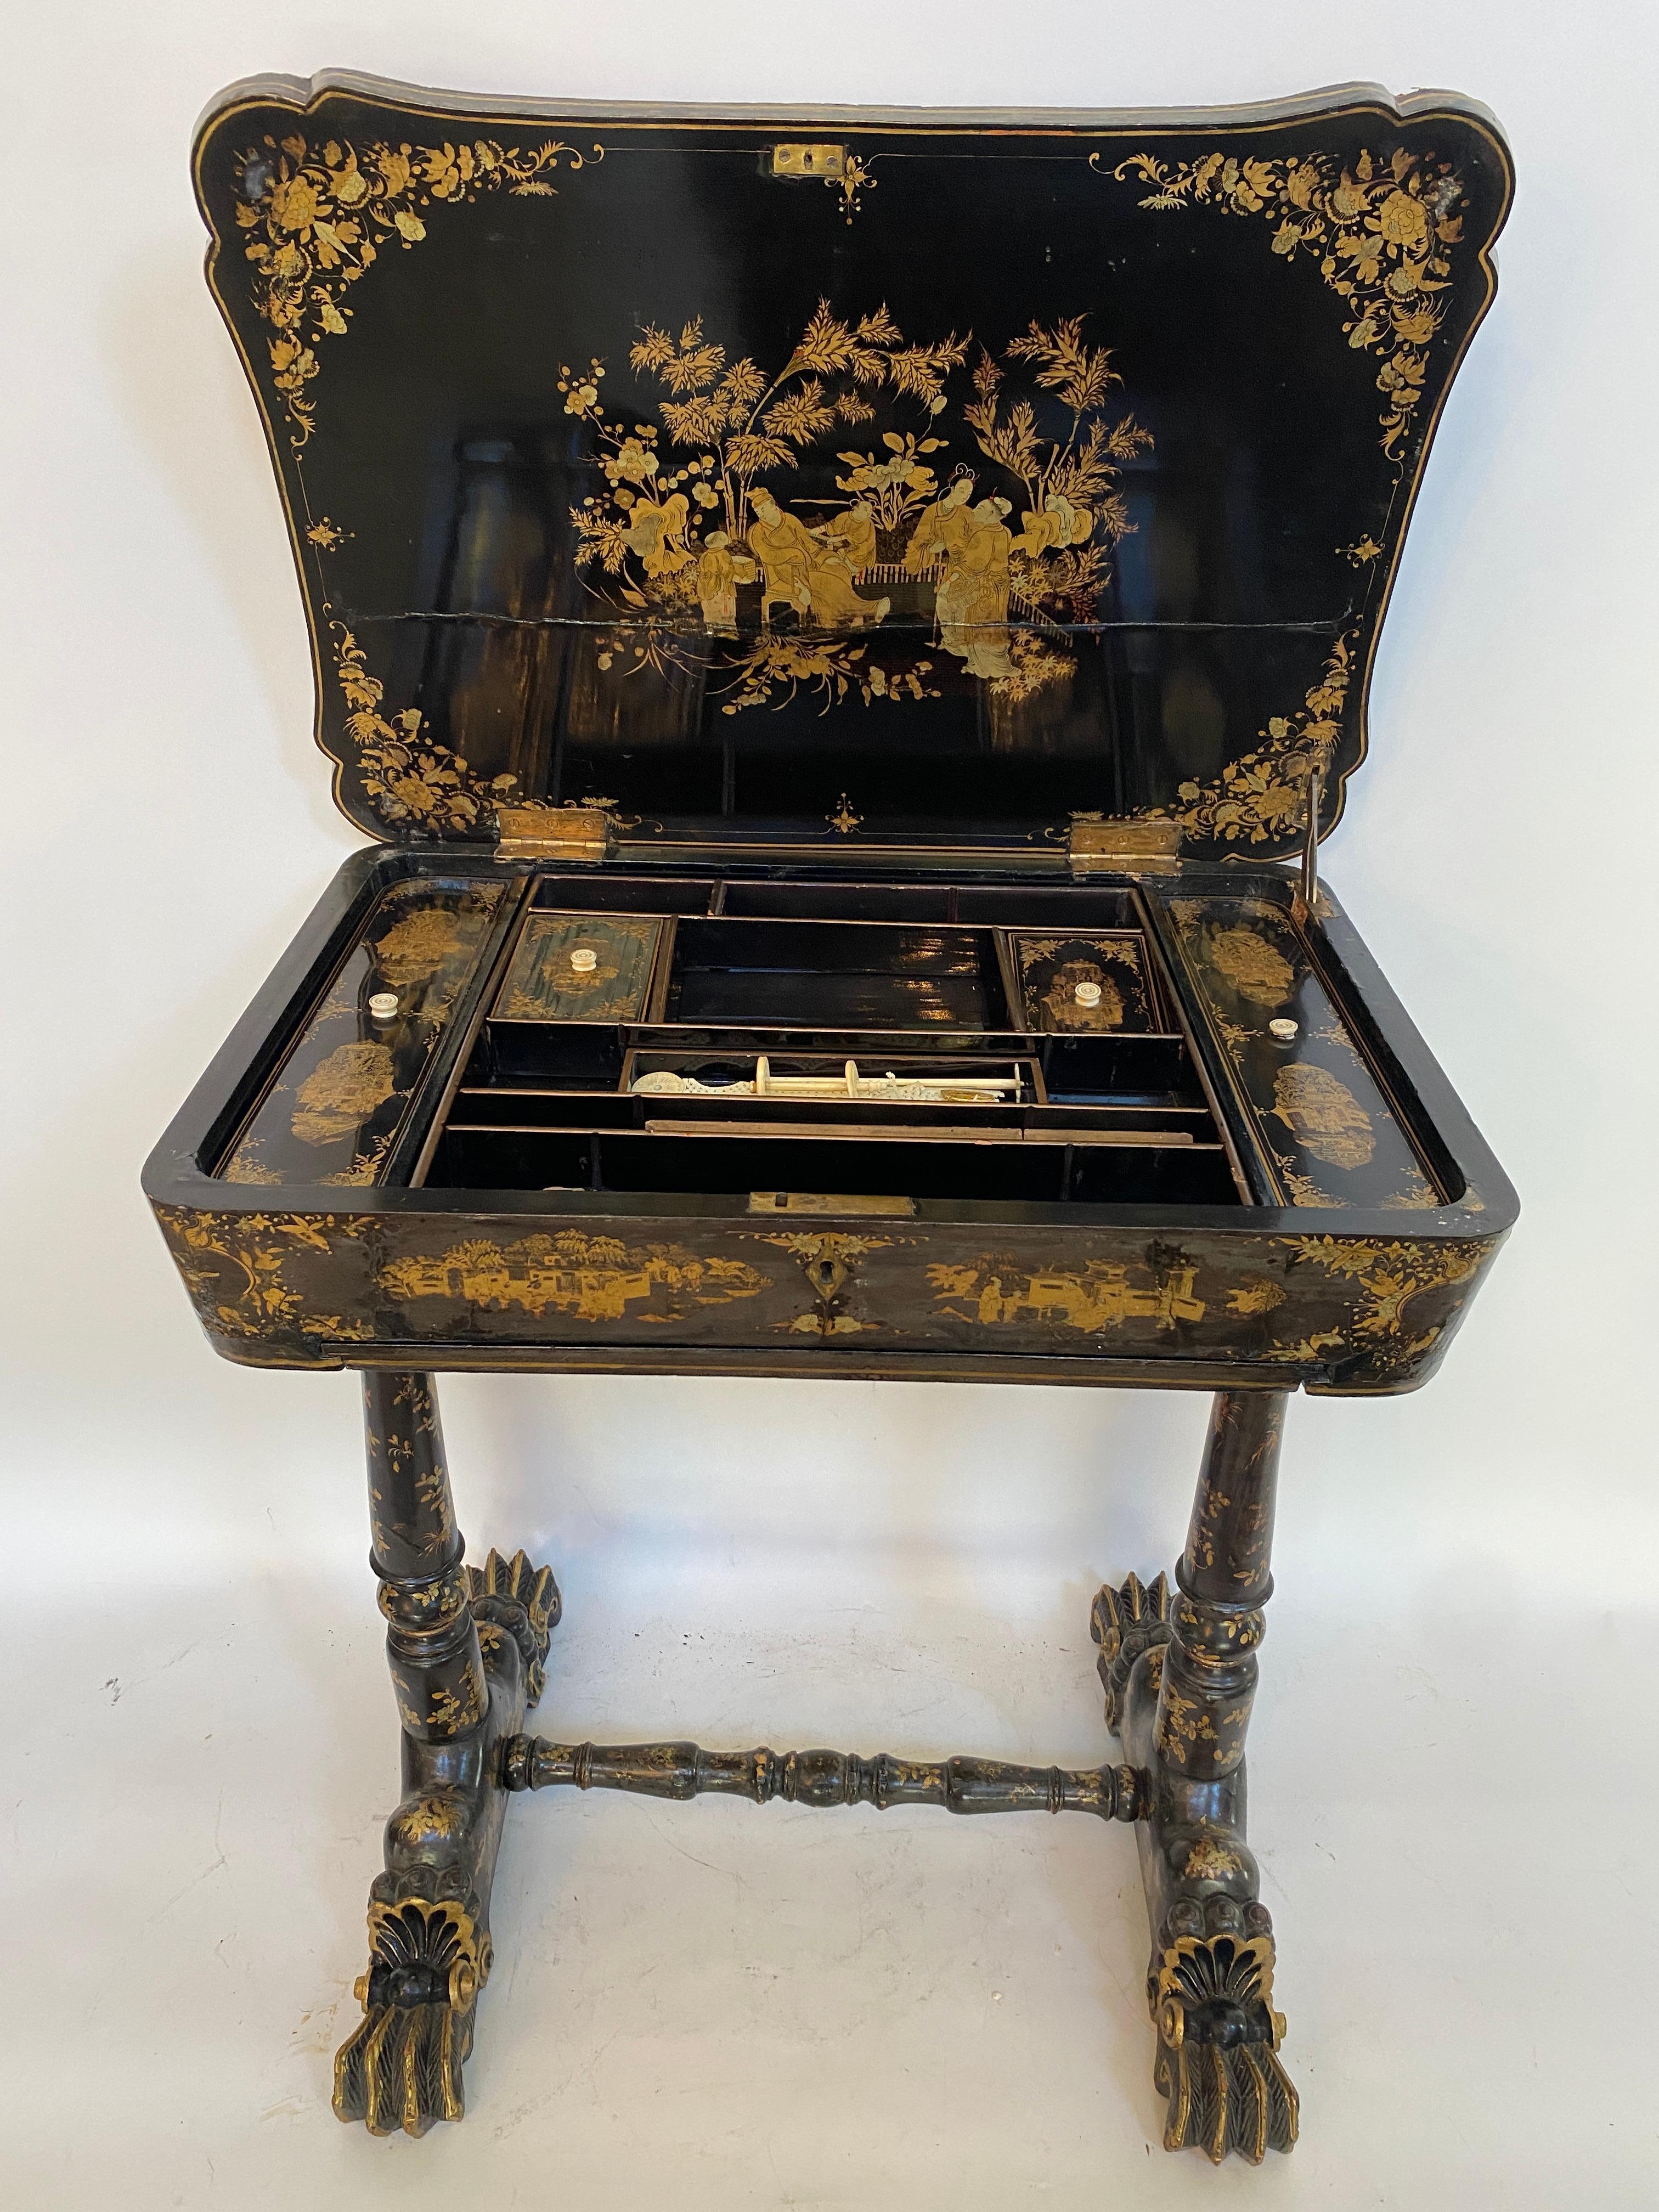 Early 19th century Chinese export lacquer and gilt sew working table from the Qing dynasty, with carved gilt dragon head feet, with the table of canted rectangular form, with mounded top, the entire finely decorated with the typical figural